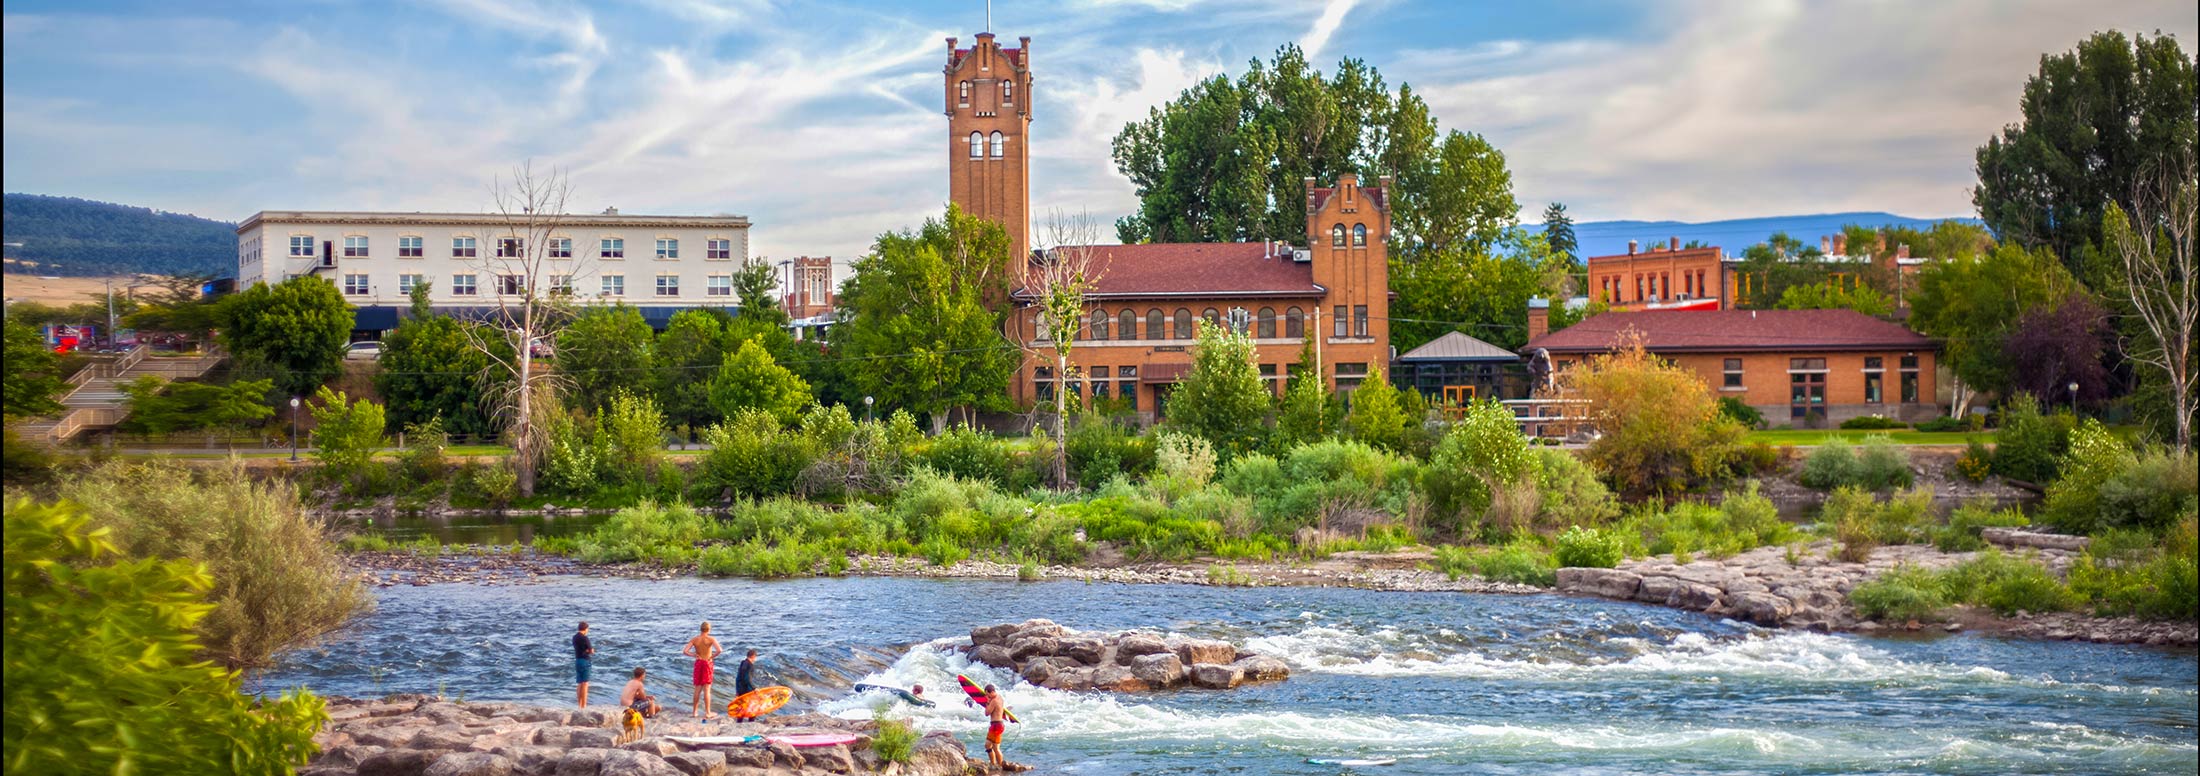 9 Things To Do in Missoula Before the End of the Summer